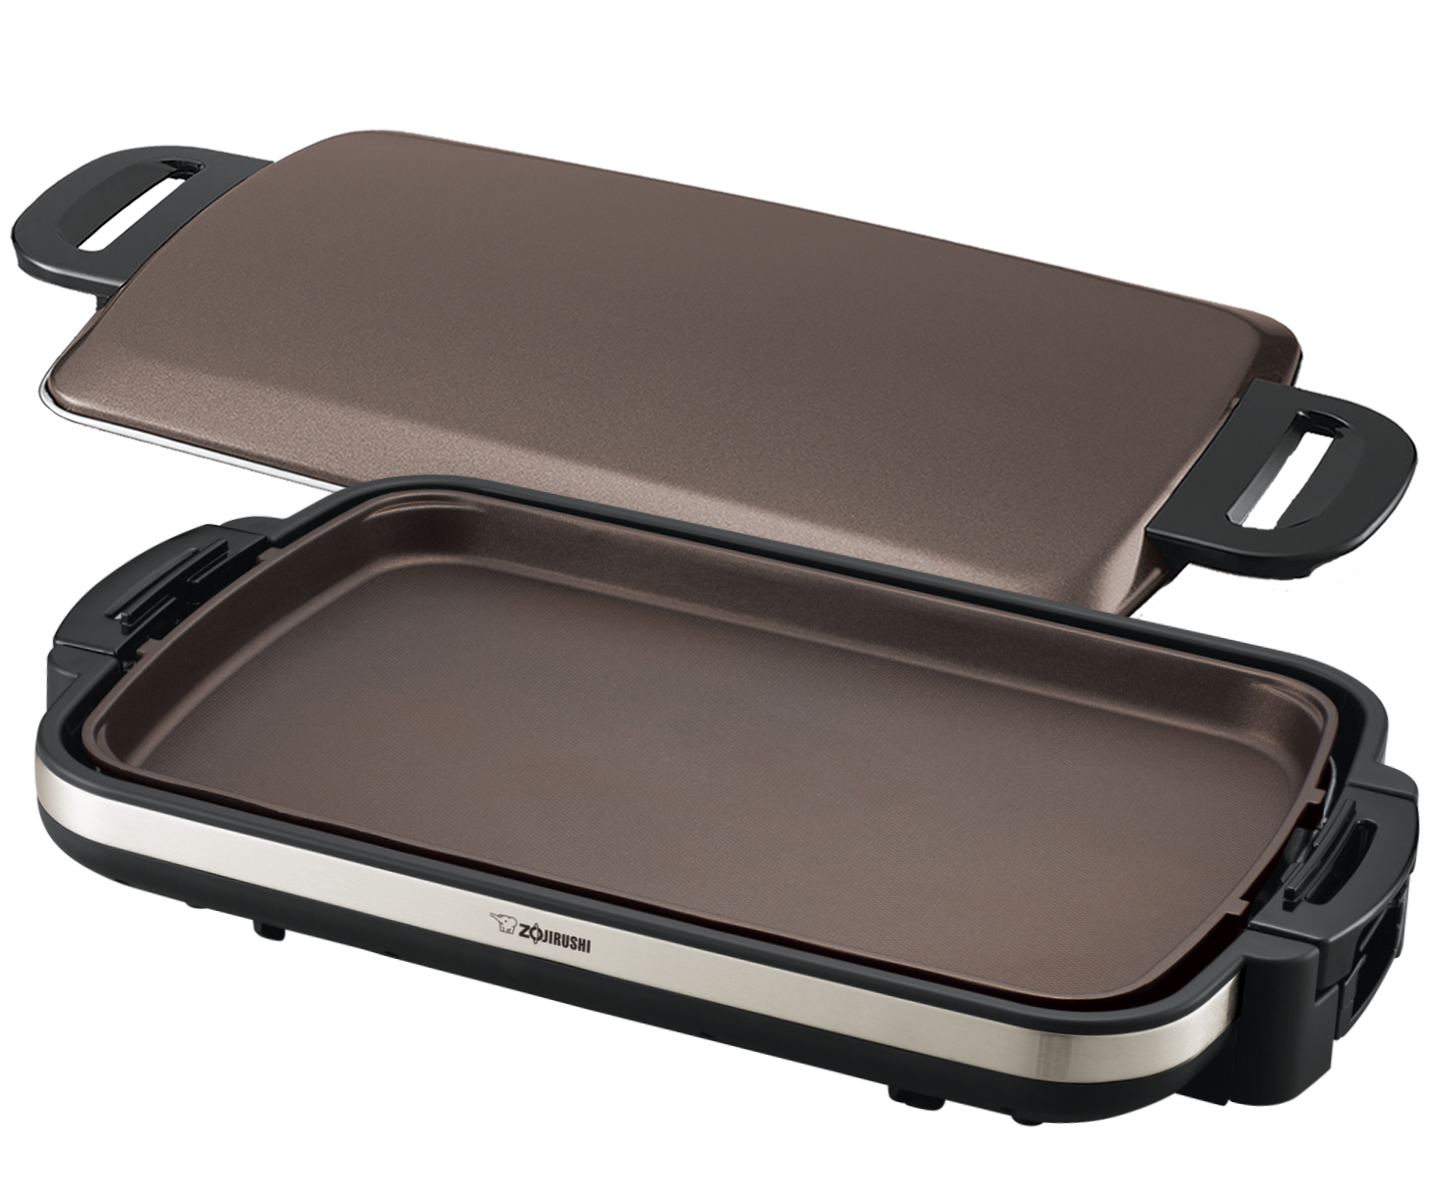 Weber Griddle Review: Pile on the Pancakes and Bacon